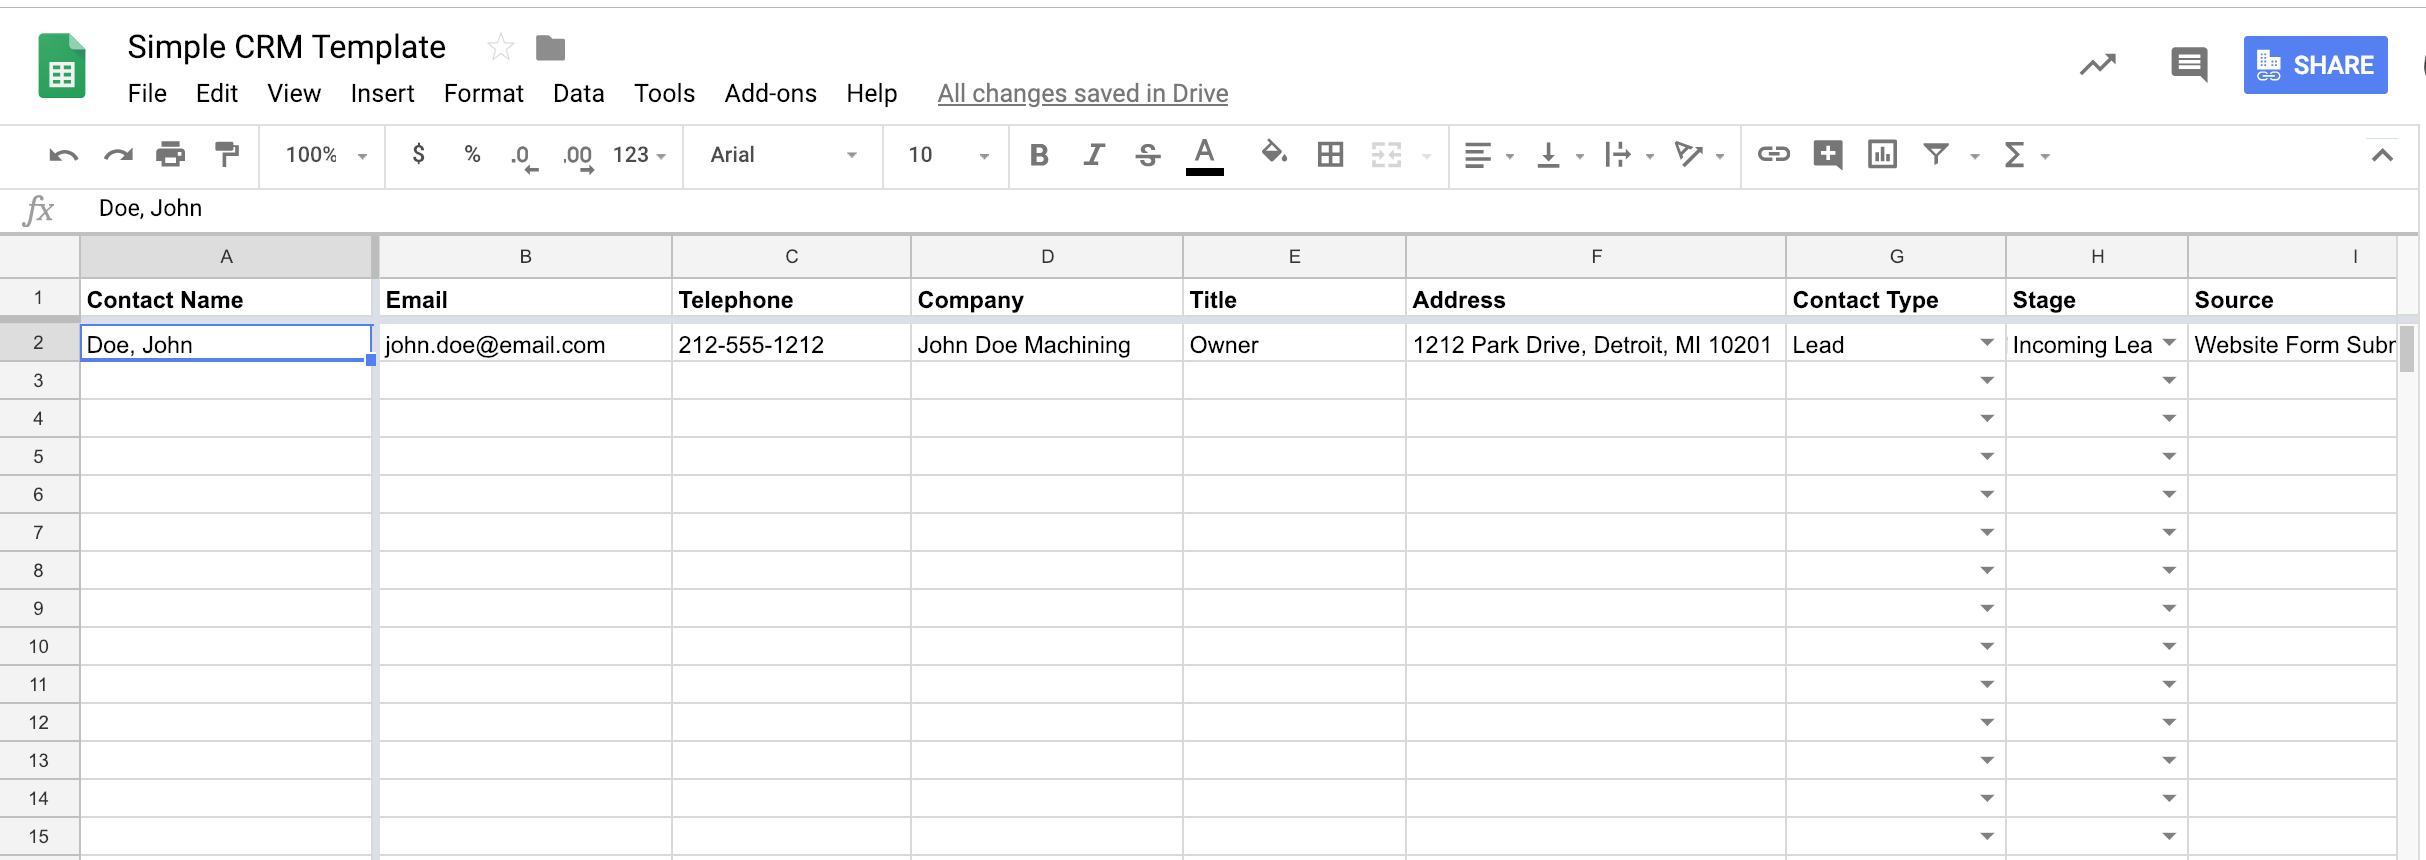 How to Create a Google Sheets CRM in 7 Steps (+ Free Template)